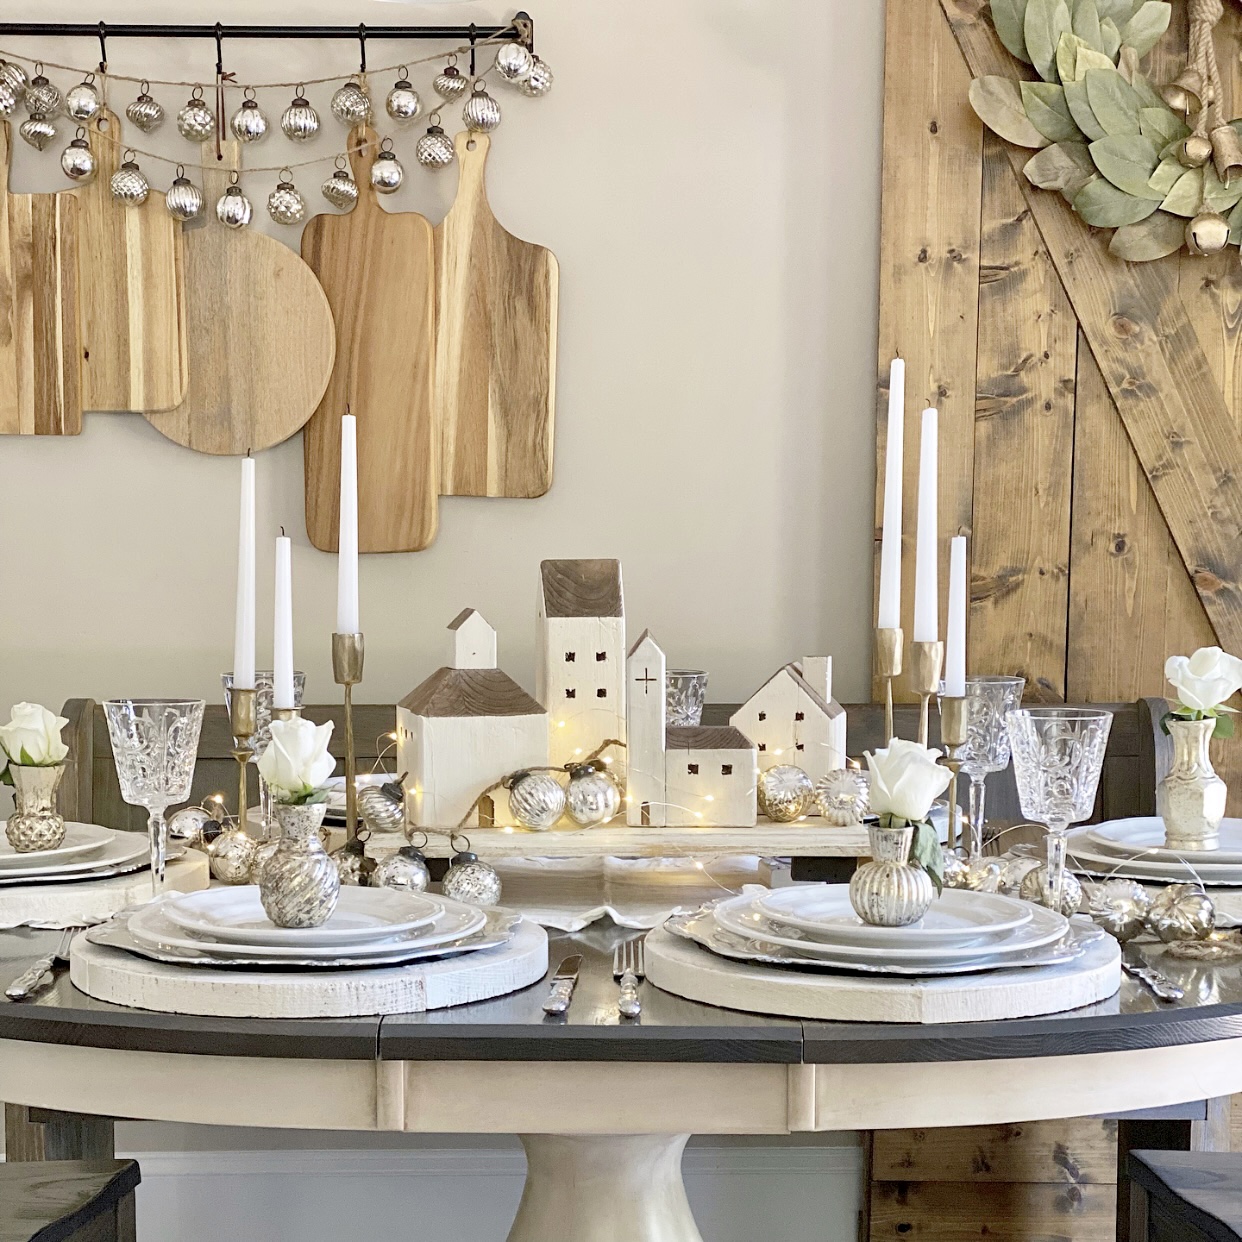 Tablescape for the holidays that is designed with neutral tones of gold, silver, white and wood. Find all the details, styling tips, and sources on the blog.